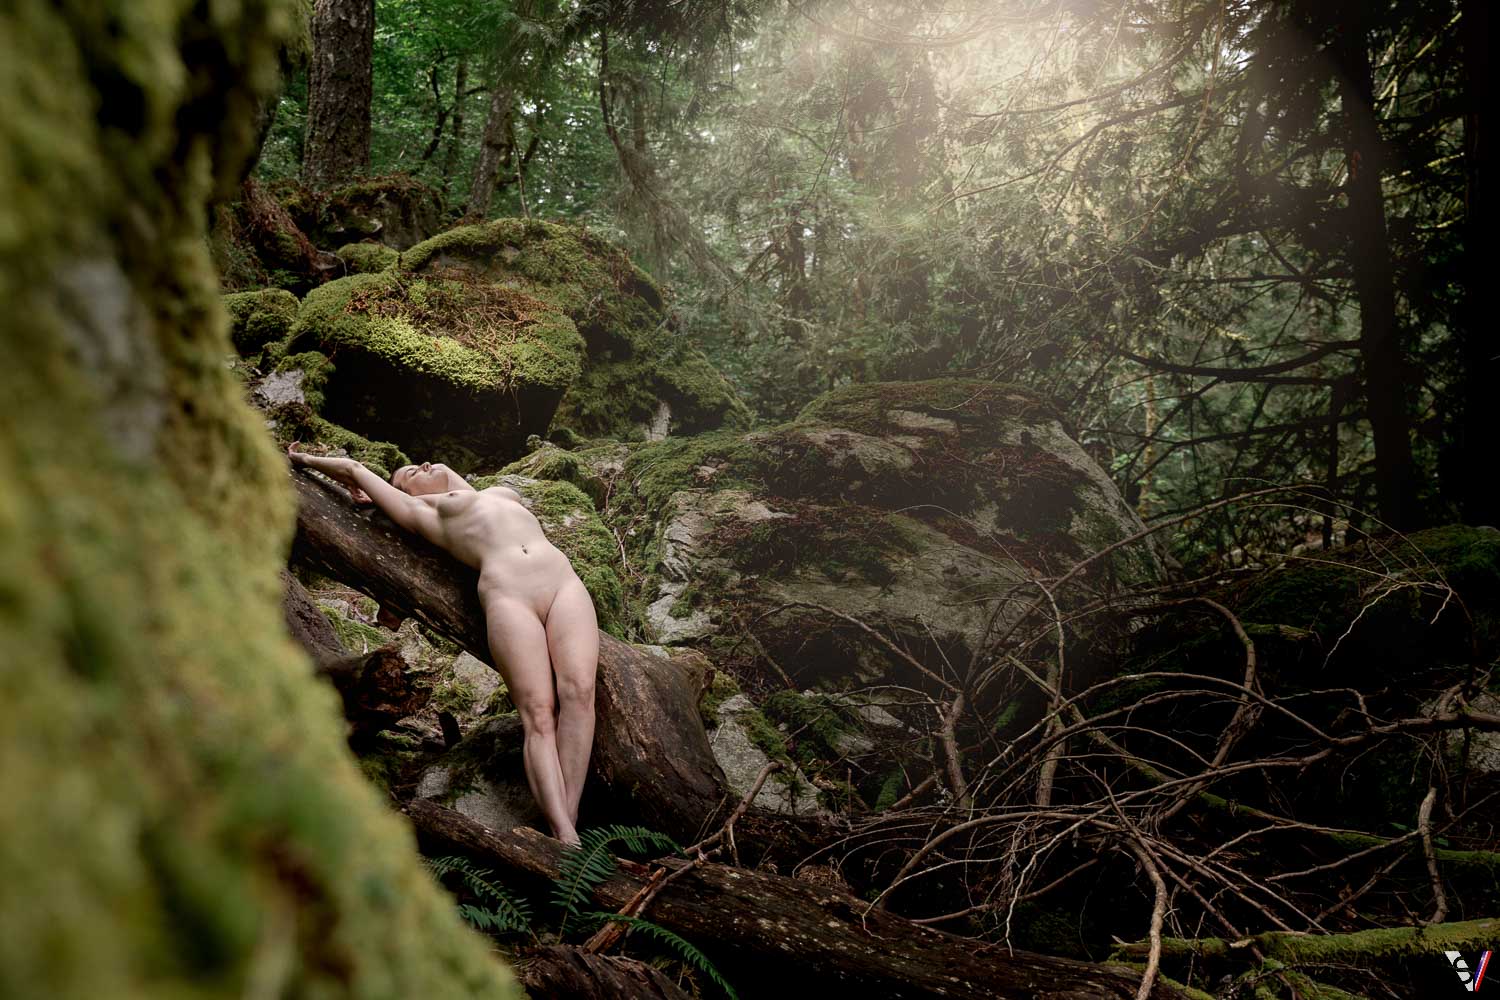 Canadian west coast artistic nude photography.Nudity in 